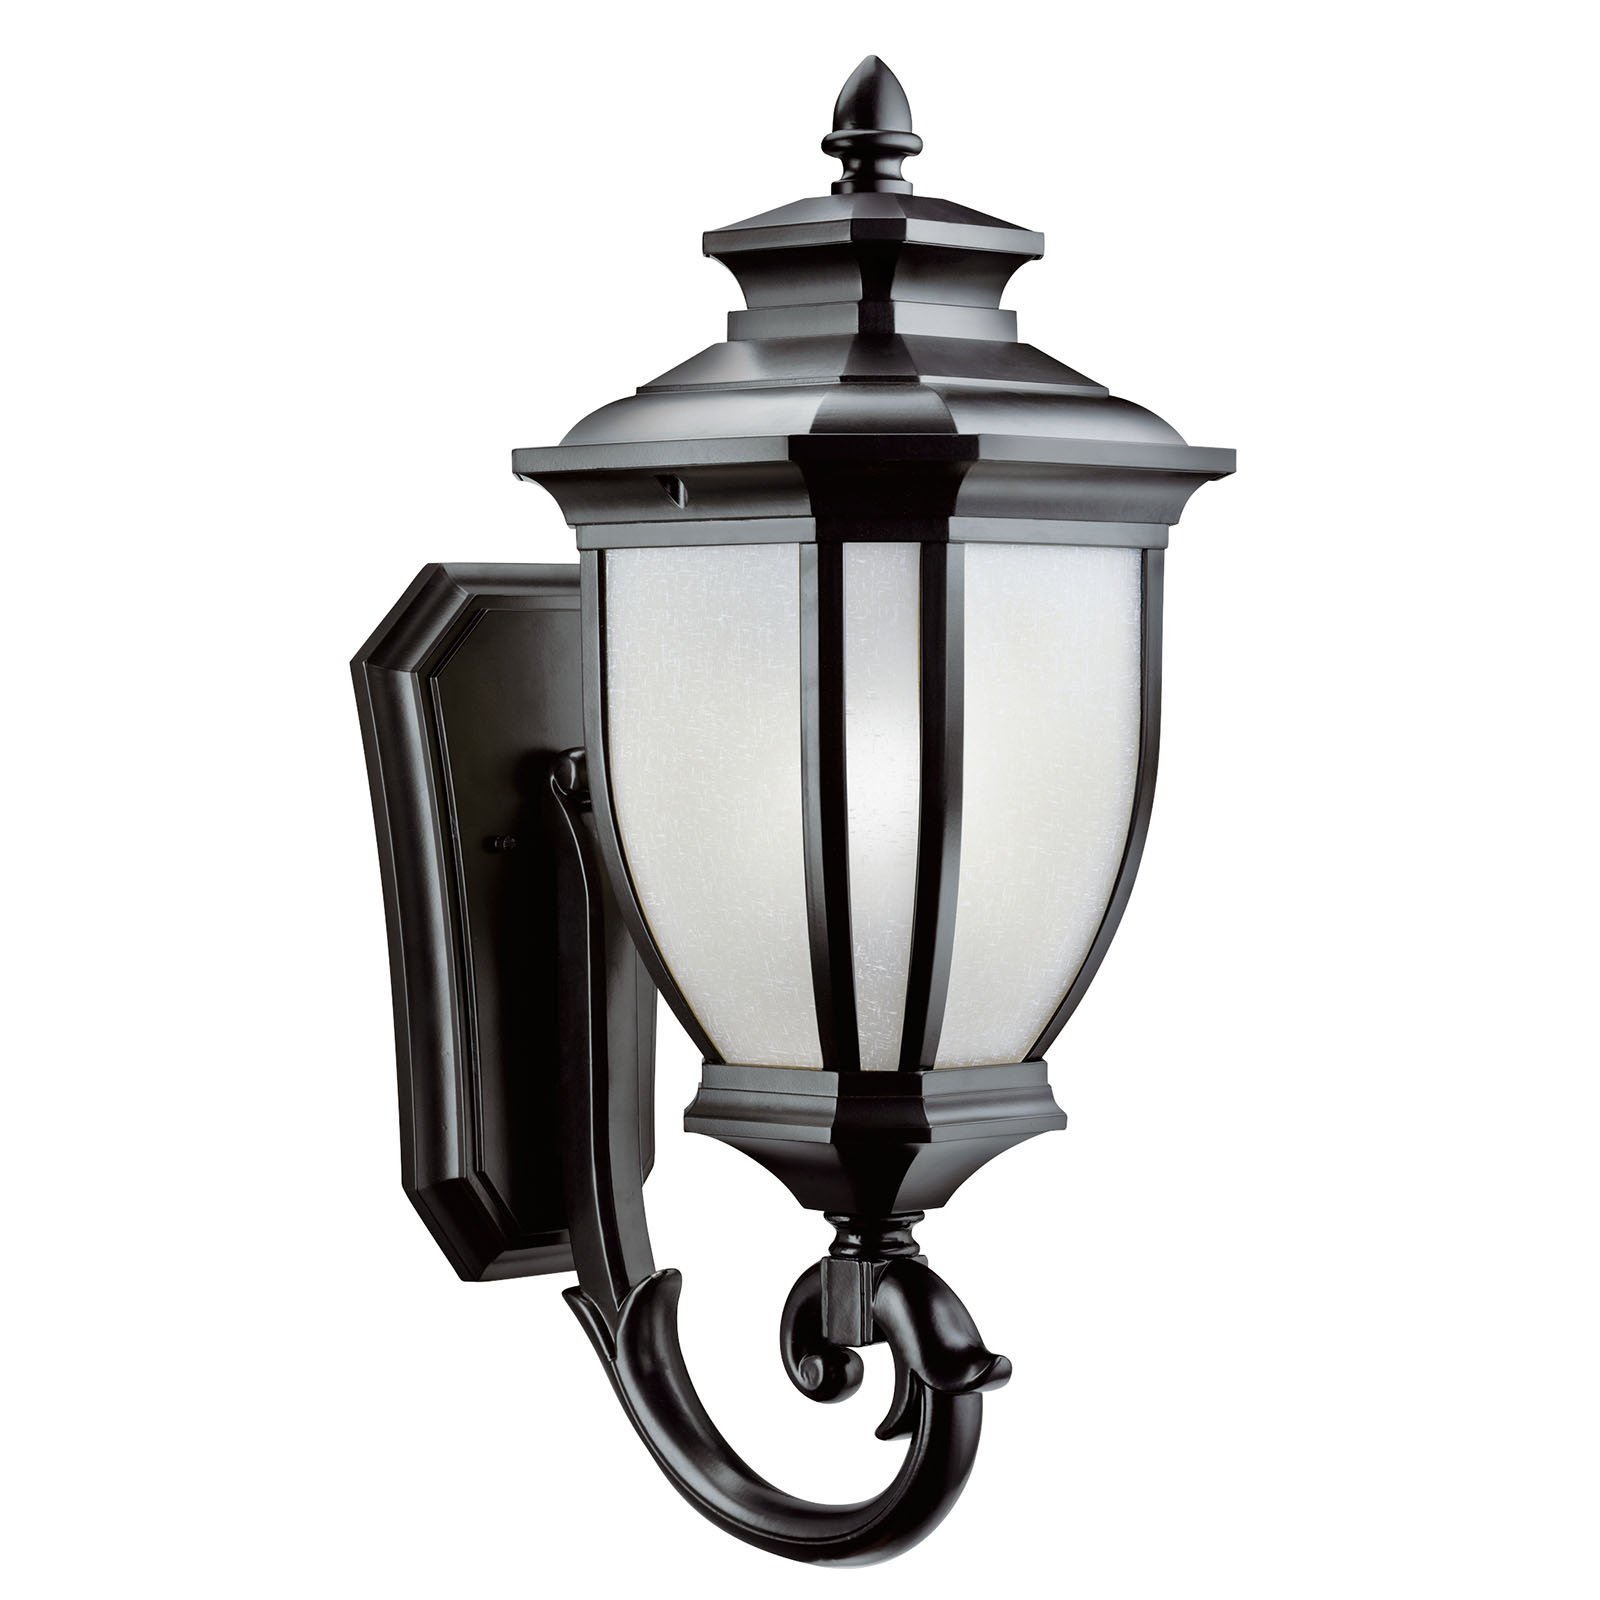 With an unmistakable British influence, this 1 light wall lantern from the elegant Salisbury(TM) collection projects timeless style for exterior spaces. Accented with a classic Black finish and White Linen Glass, this piece is as functional as it is refined.